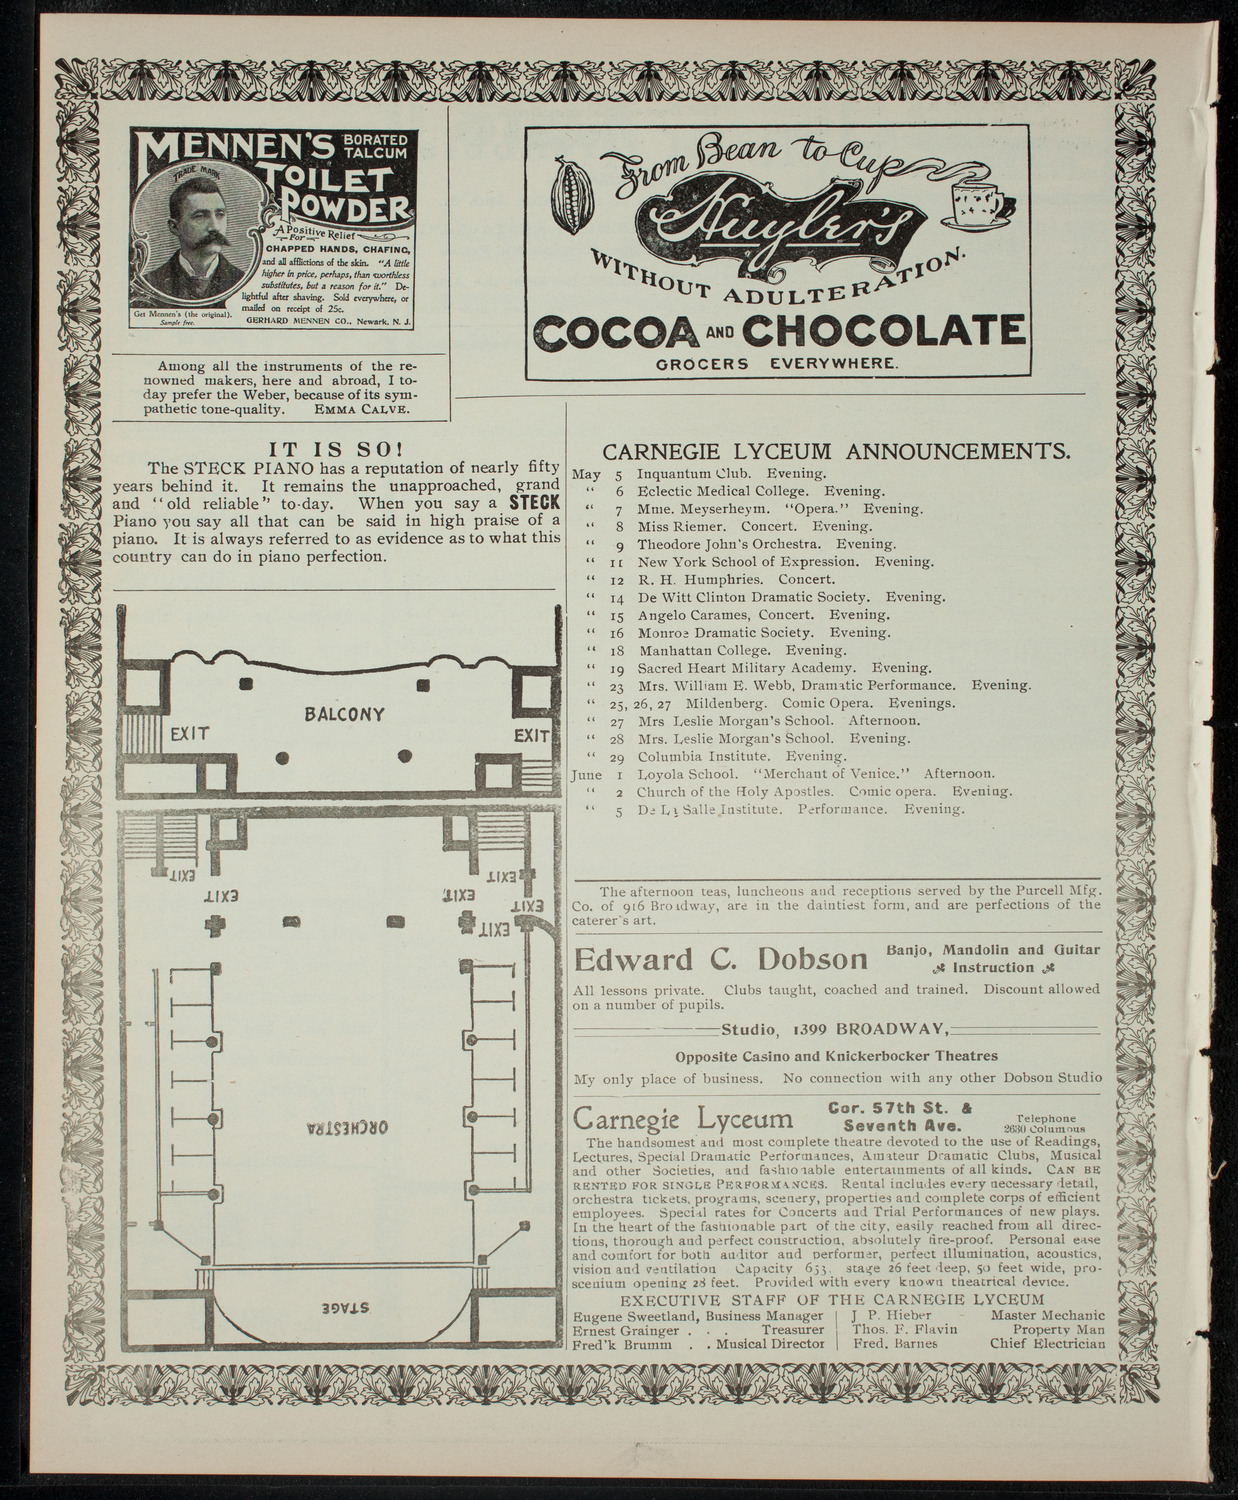 The Inquantum Club, May 5, 1903, program page 4